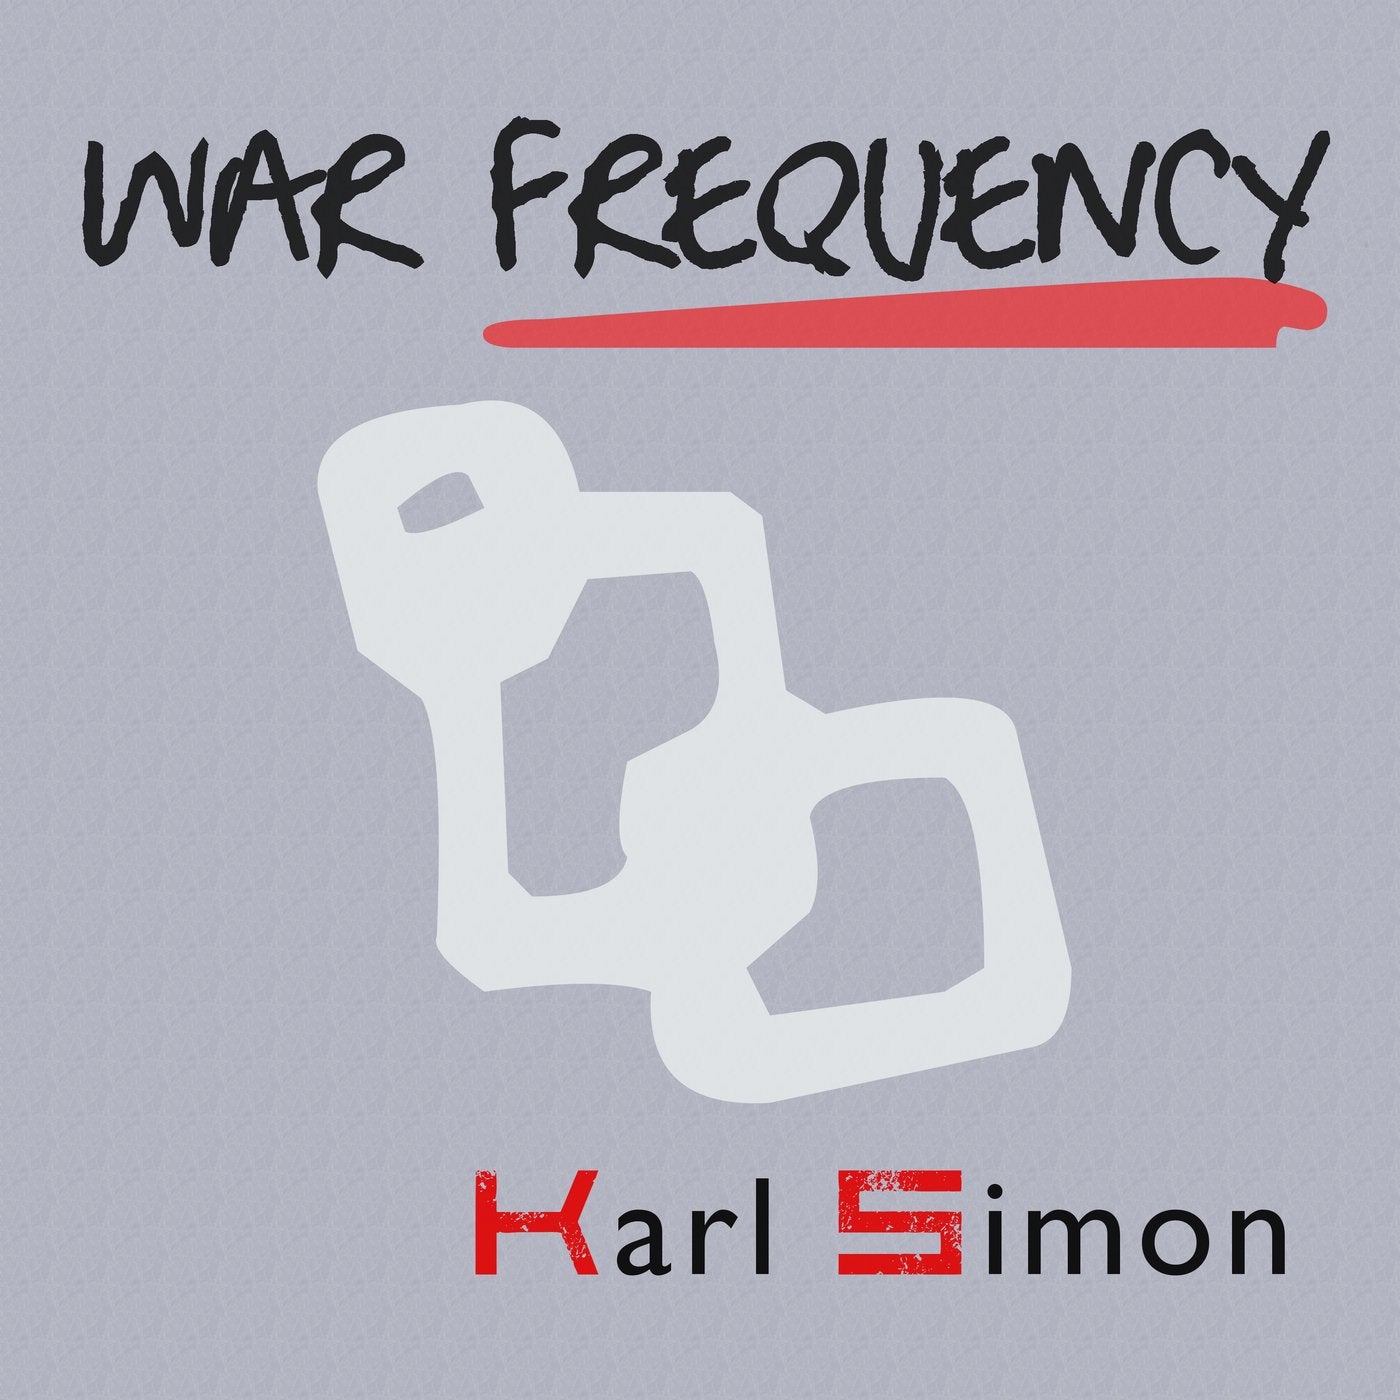 War Frequency